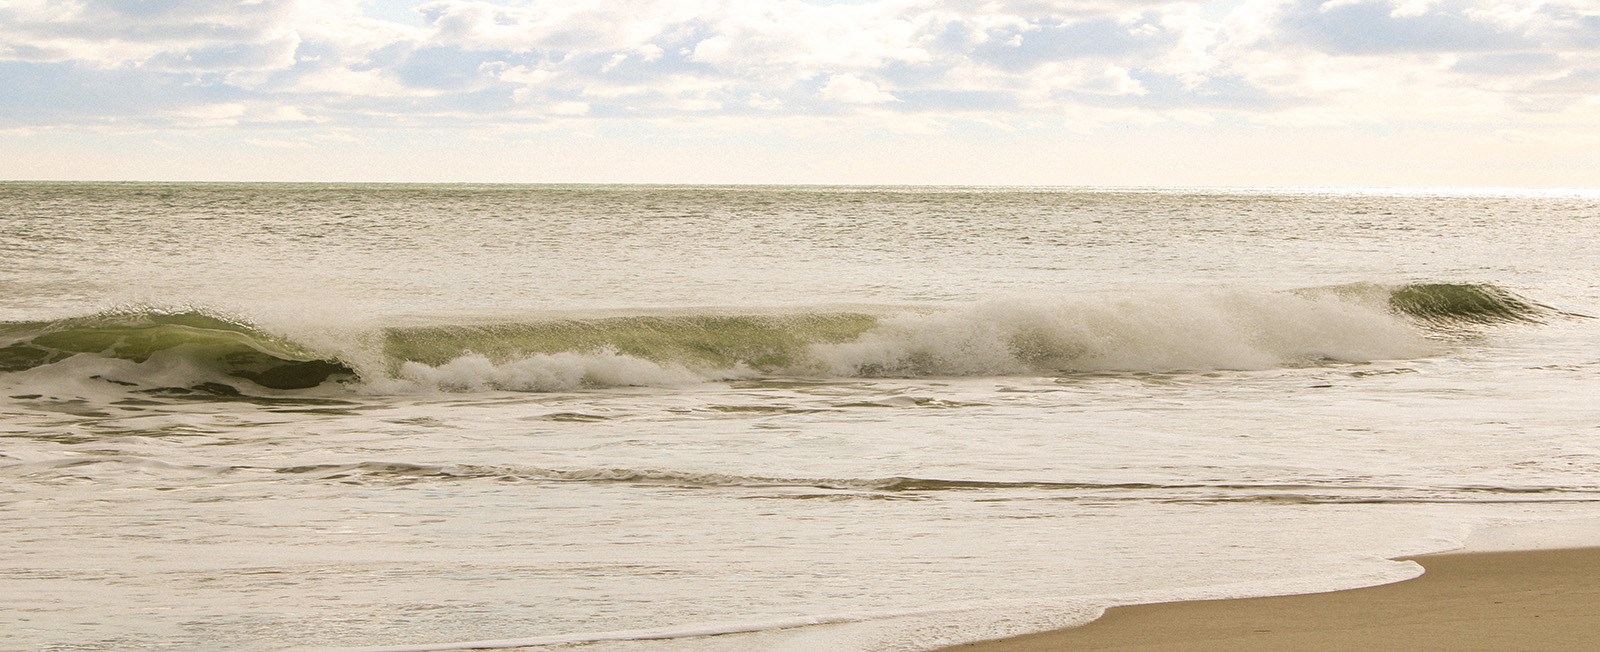 Looking to visit Nauset Beach? Check out these nearby destinations!